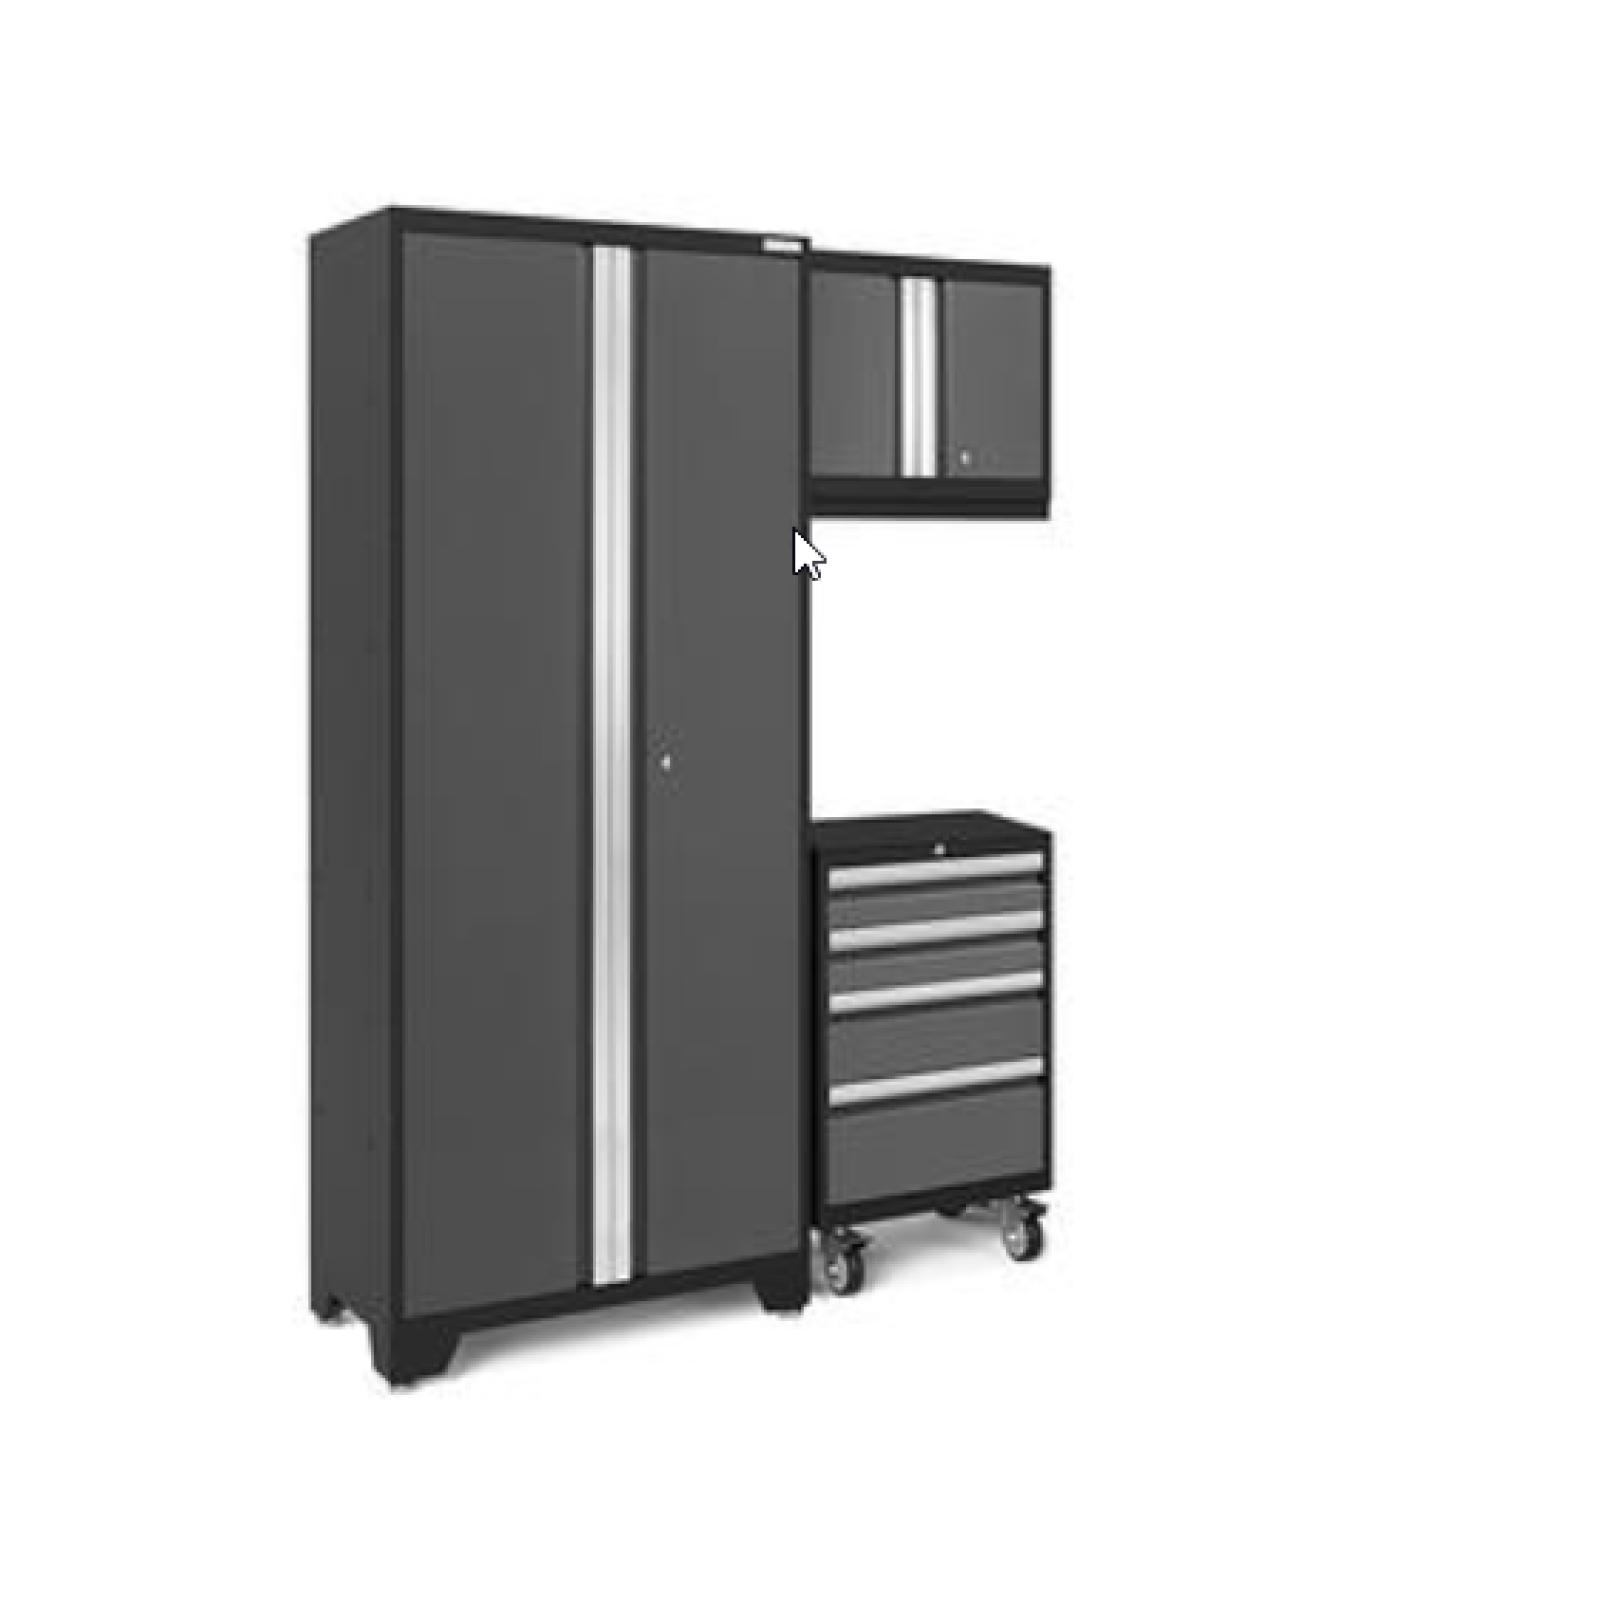 DALLAS LOCATION - NewAge Products 3-Cabinets Steel Garage Storage System in Charcoal Gray